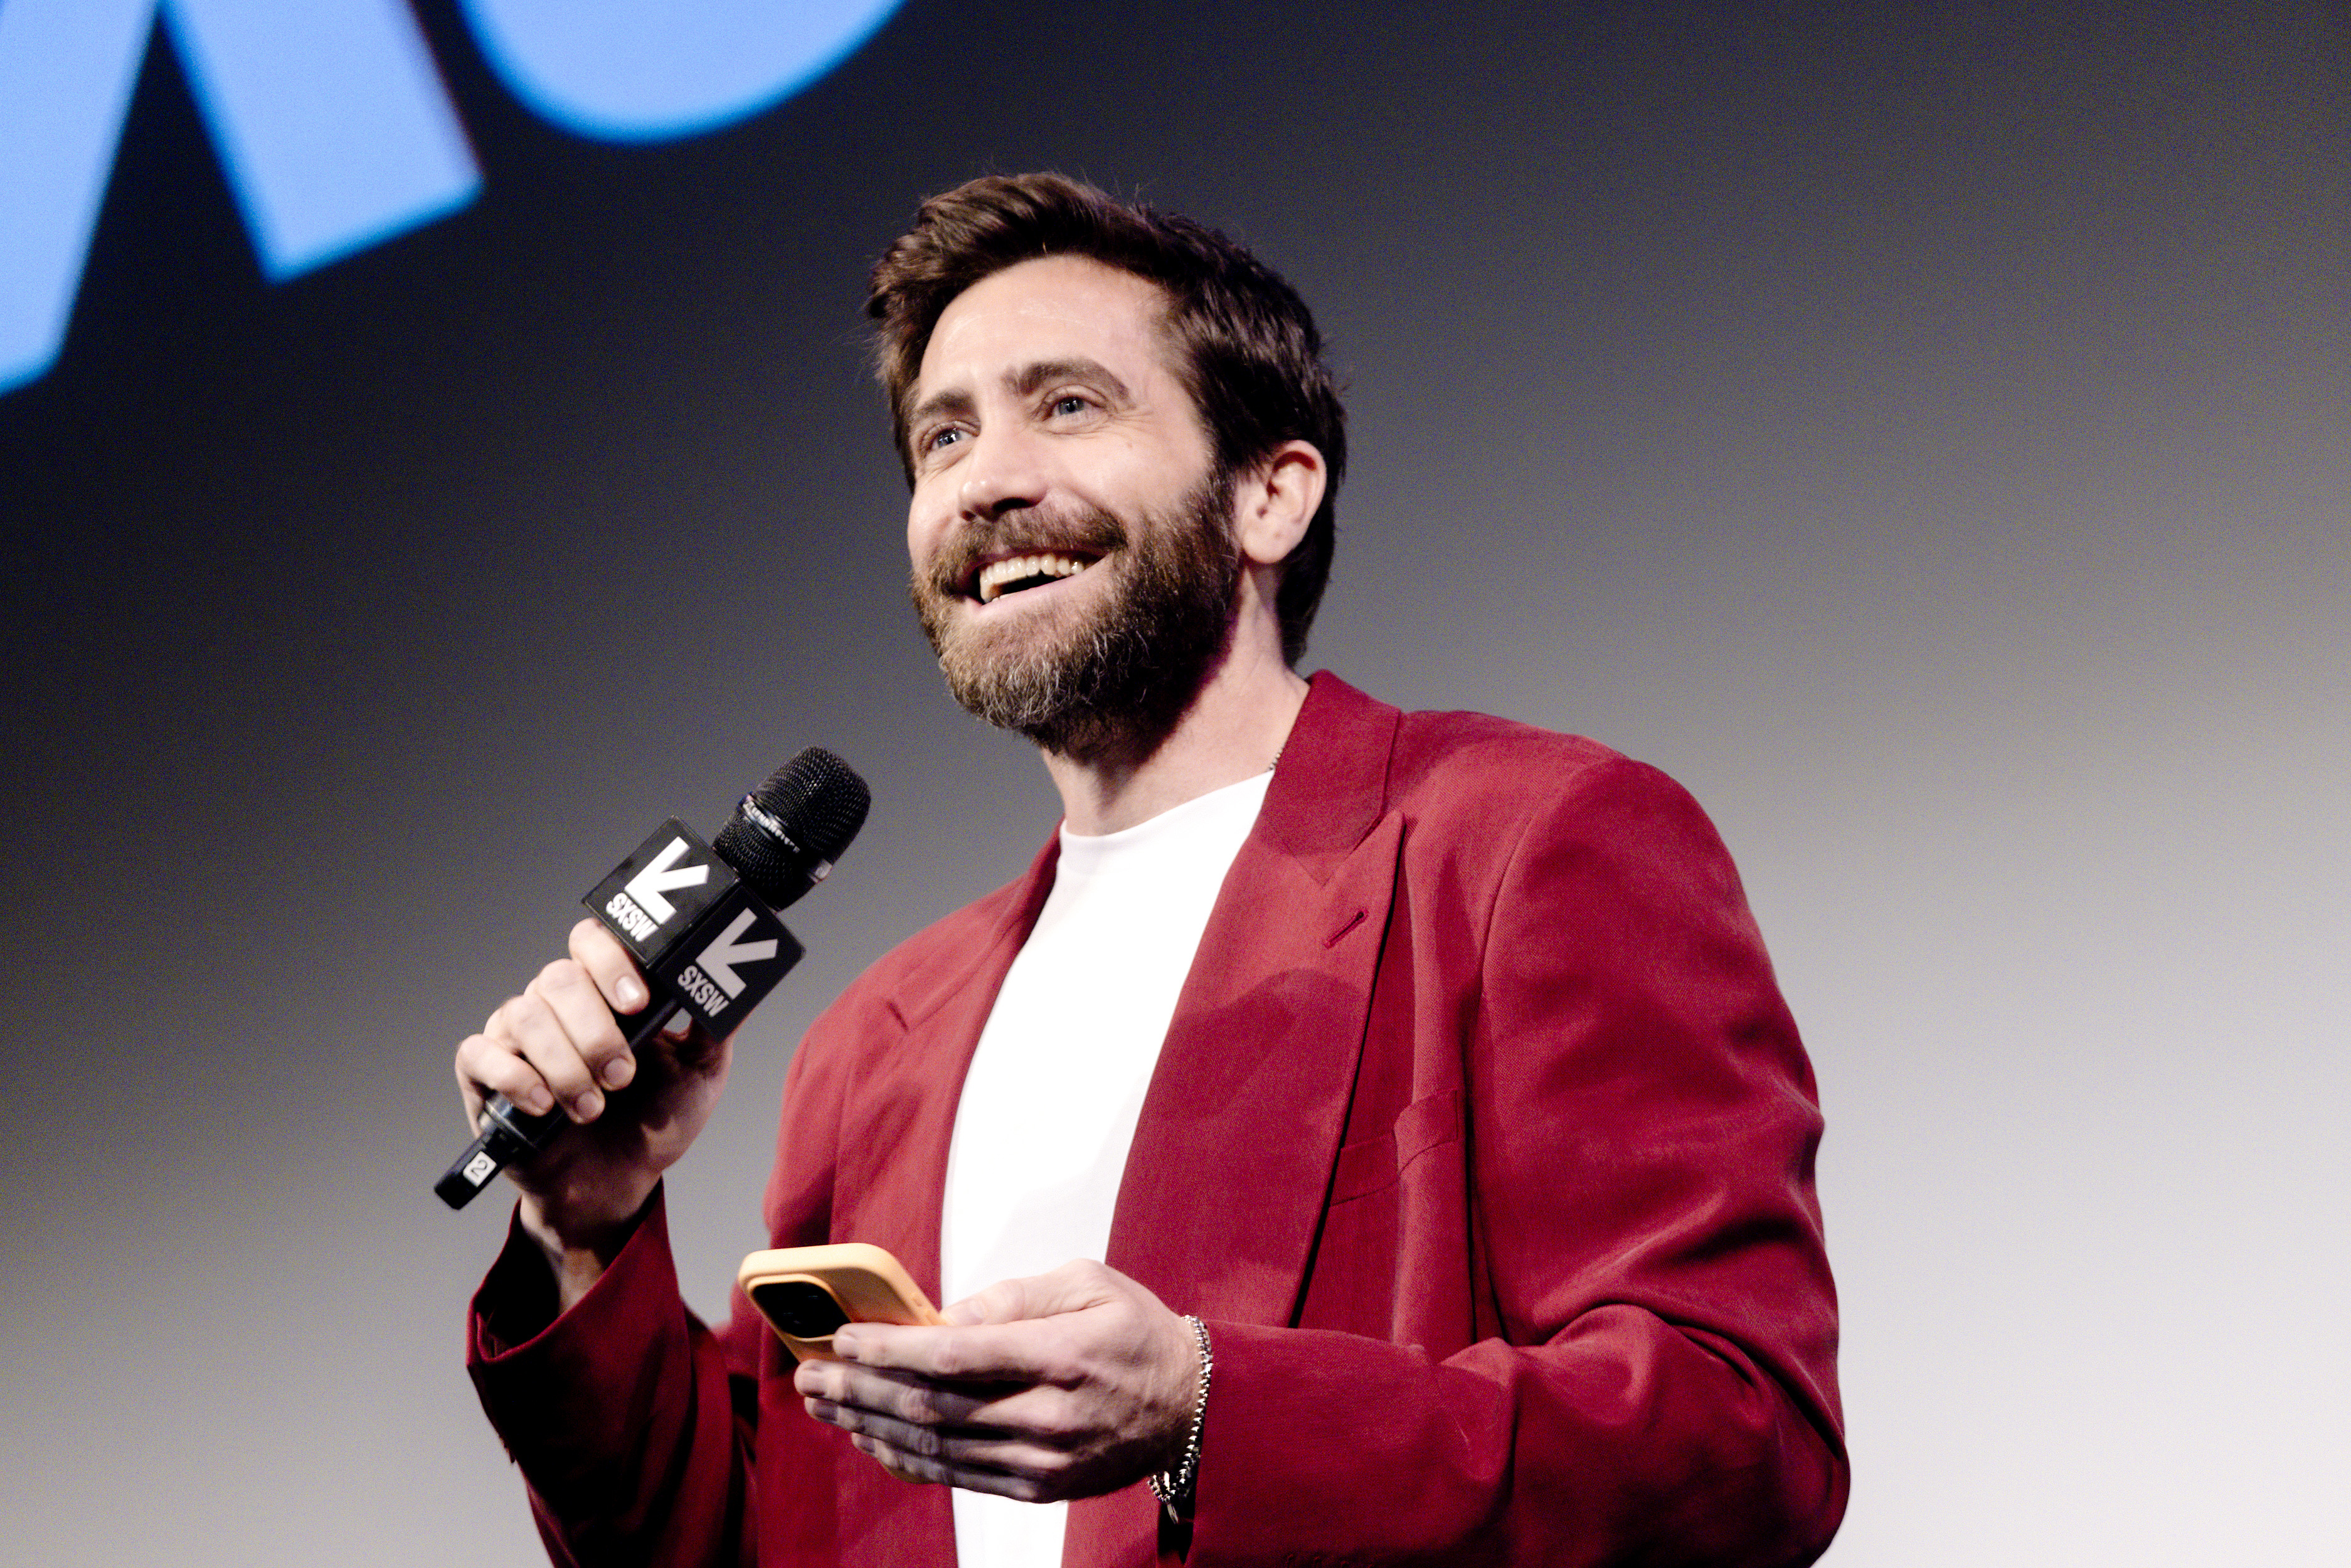 Closeup of Jake Gyllenhaal speaking onstage while holding a smartphone